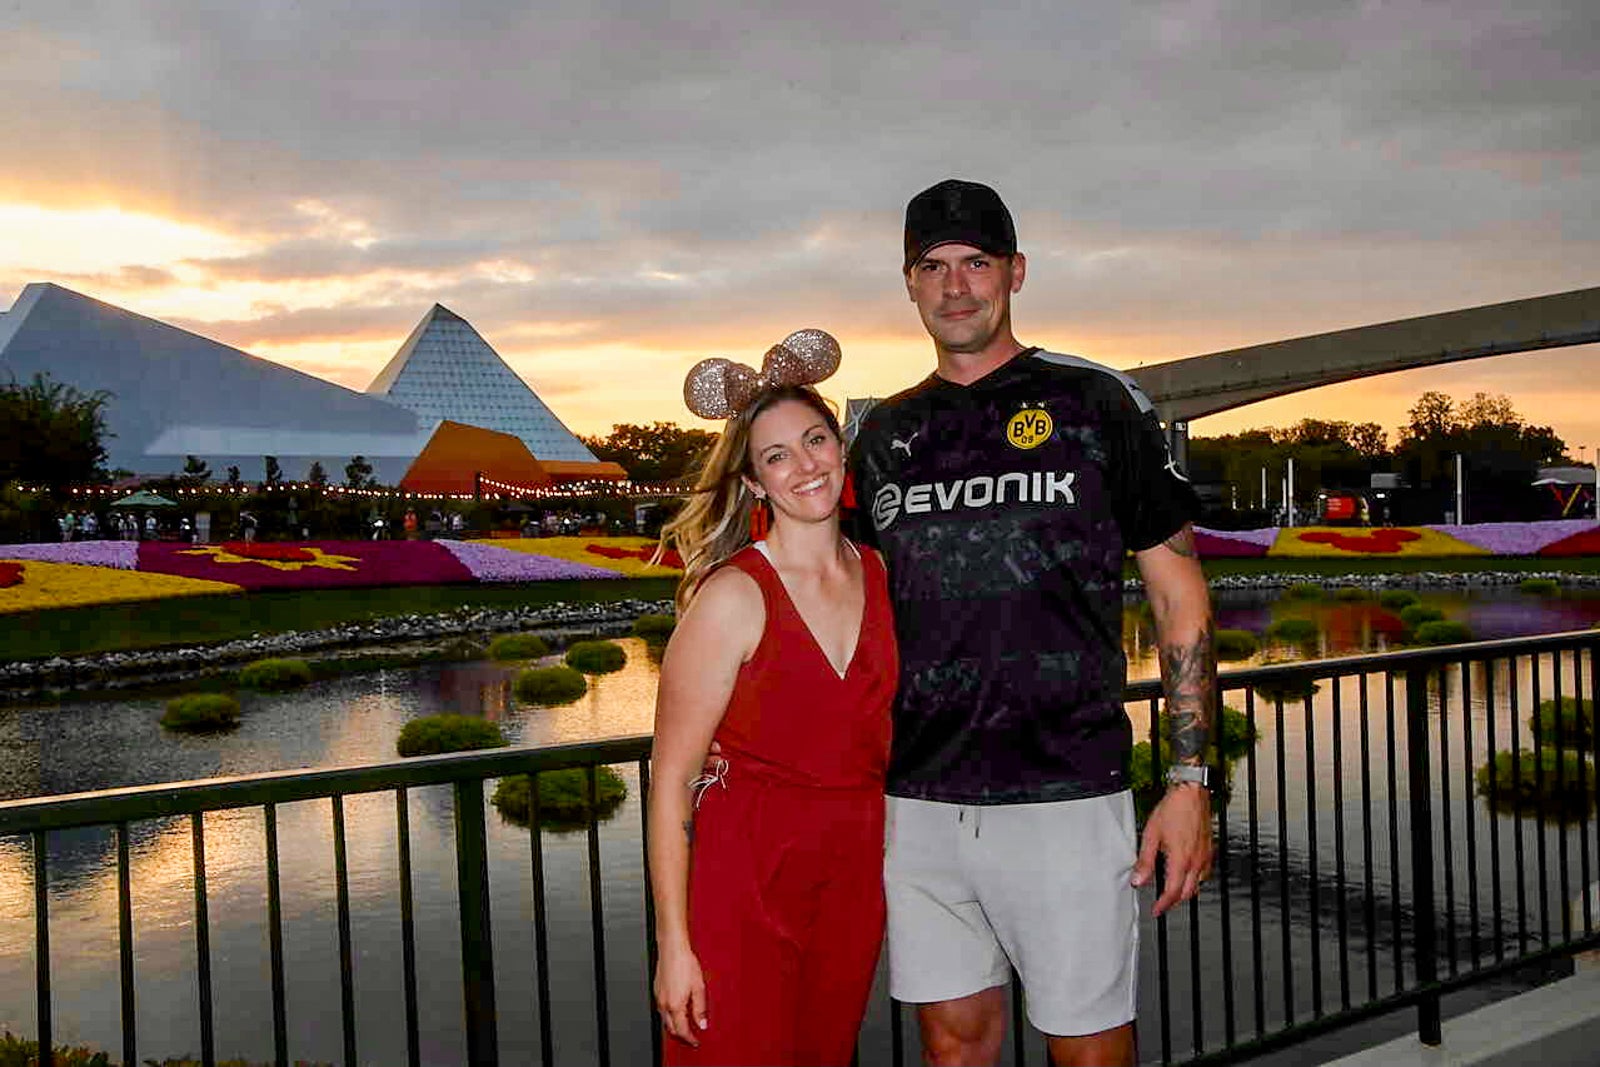 Tarah Chieffi and her husband during a nighttime visit to Epcot